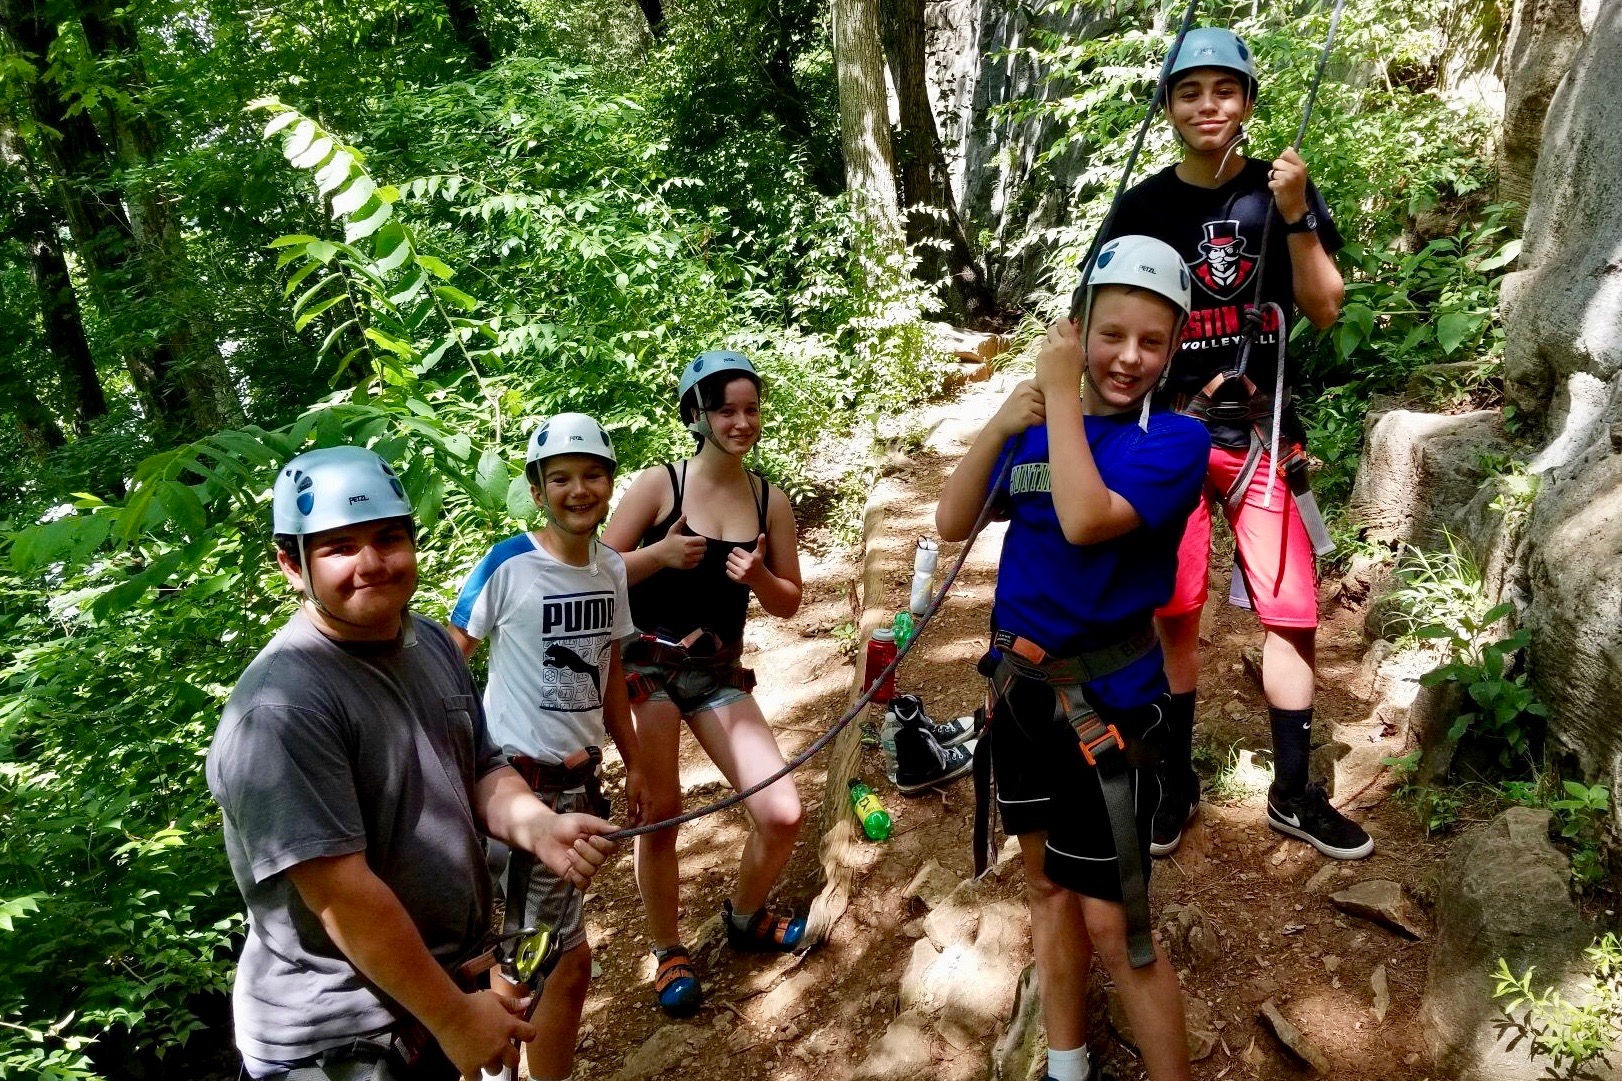 Govs Outdoors Teen Camp is open to ages 12-15 and focuses on getting teens outdoors and into activities such as hiking, biking, rock climbing and caving, all offered in the Clarksville area.